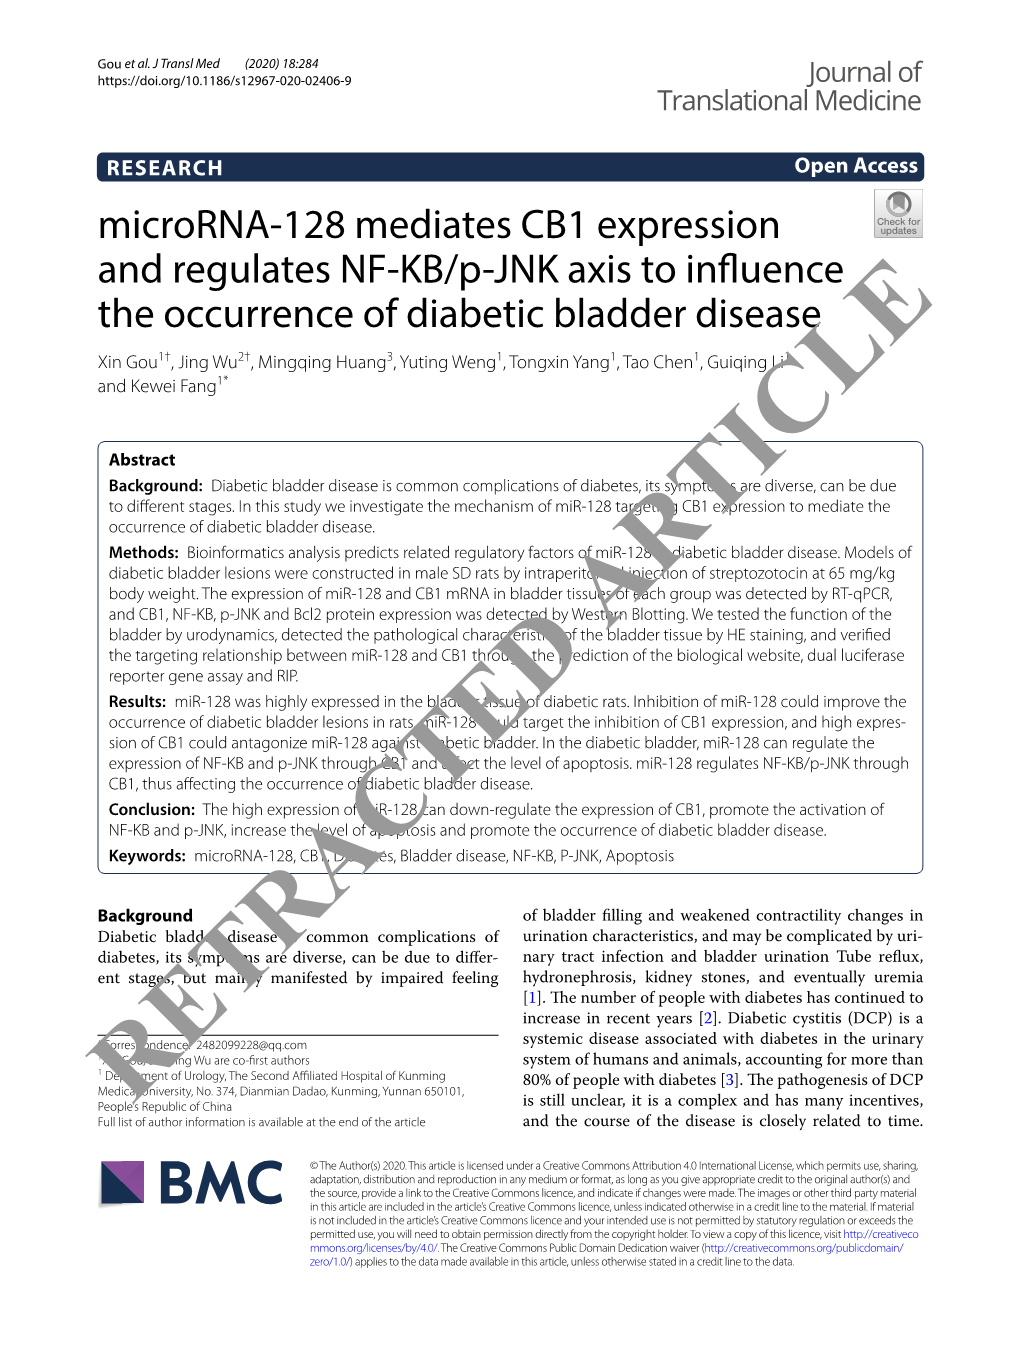 Microrna-128 Mediates CB1 Expression and Regulates NF-KB/P